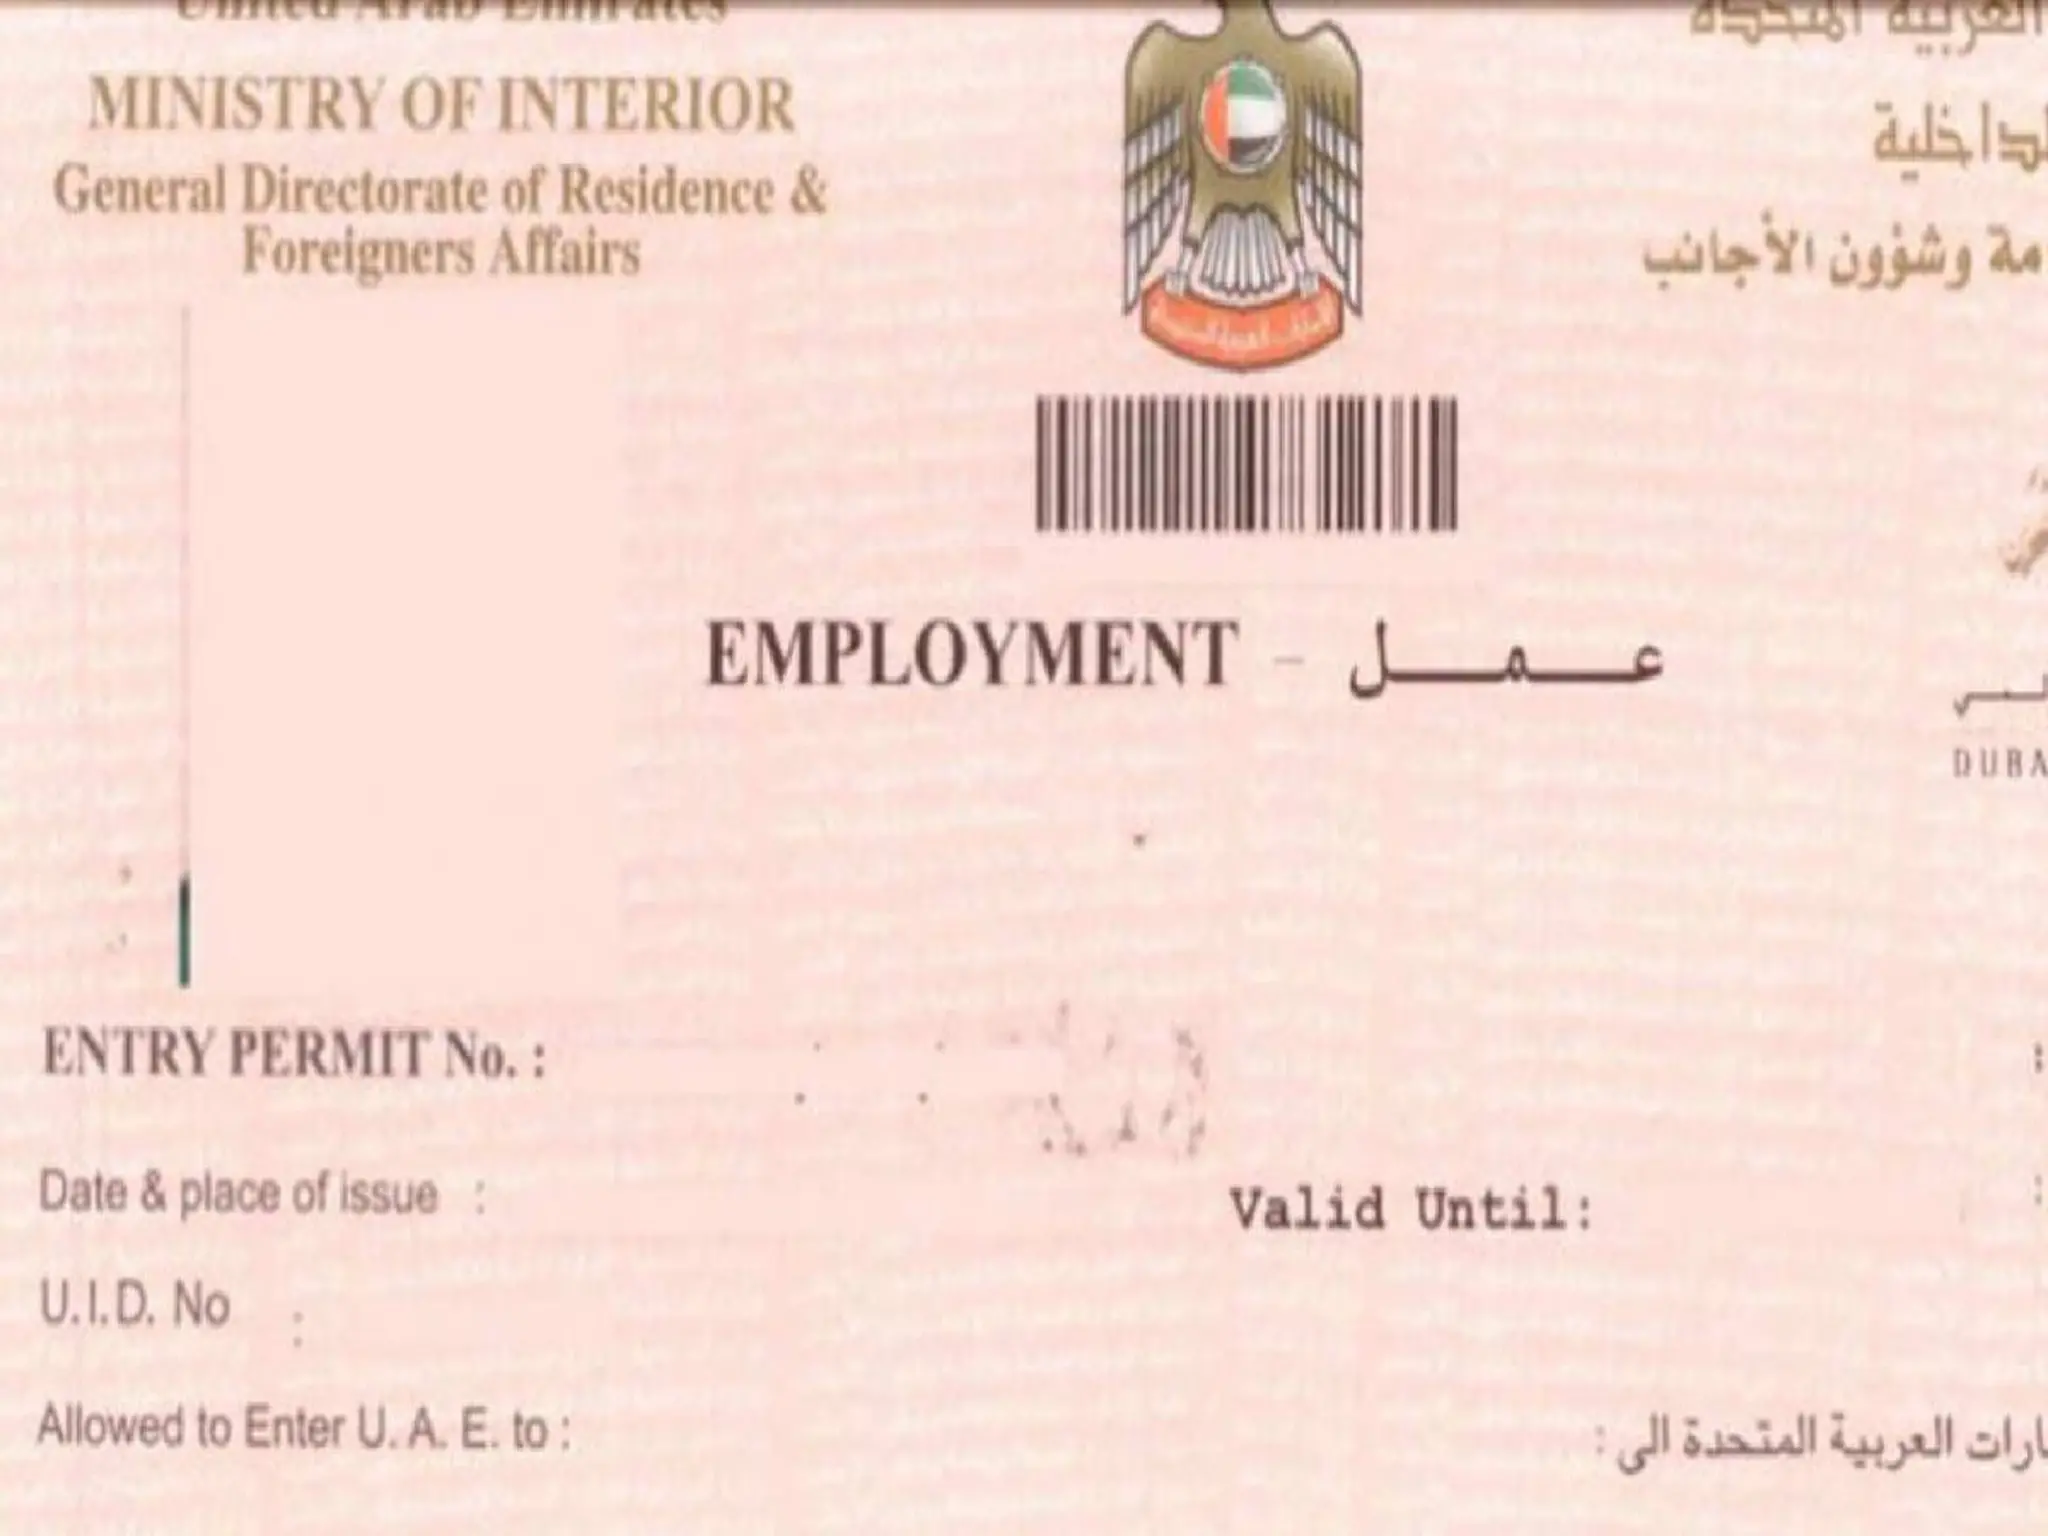 Dubai announces the provision of a temporary work permit for a period of 3 months